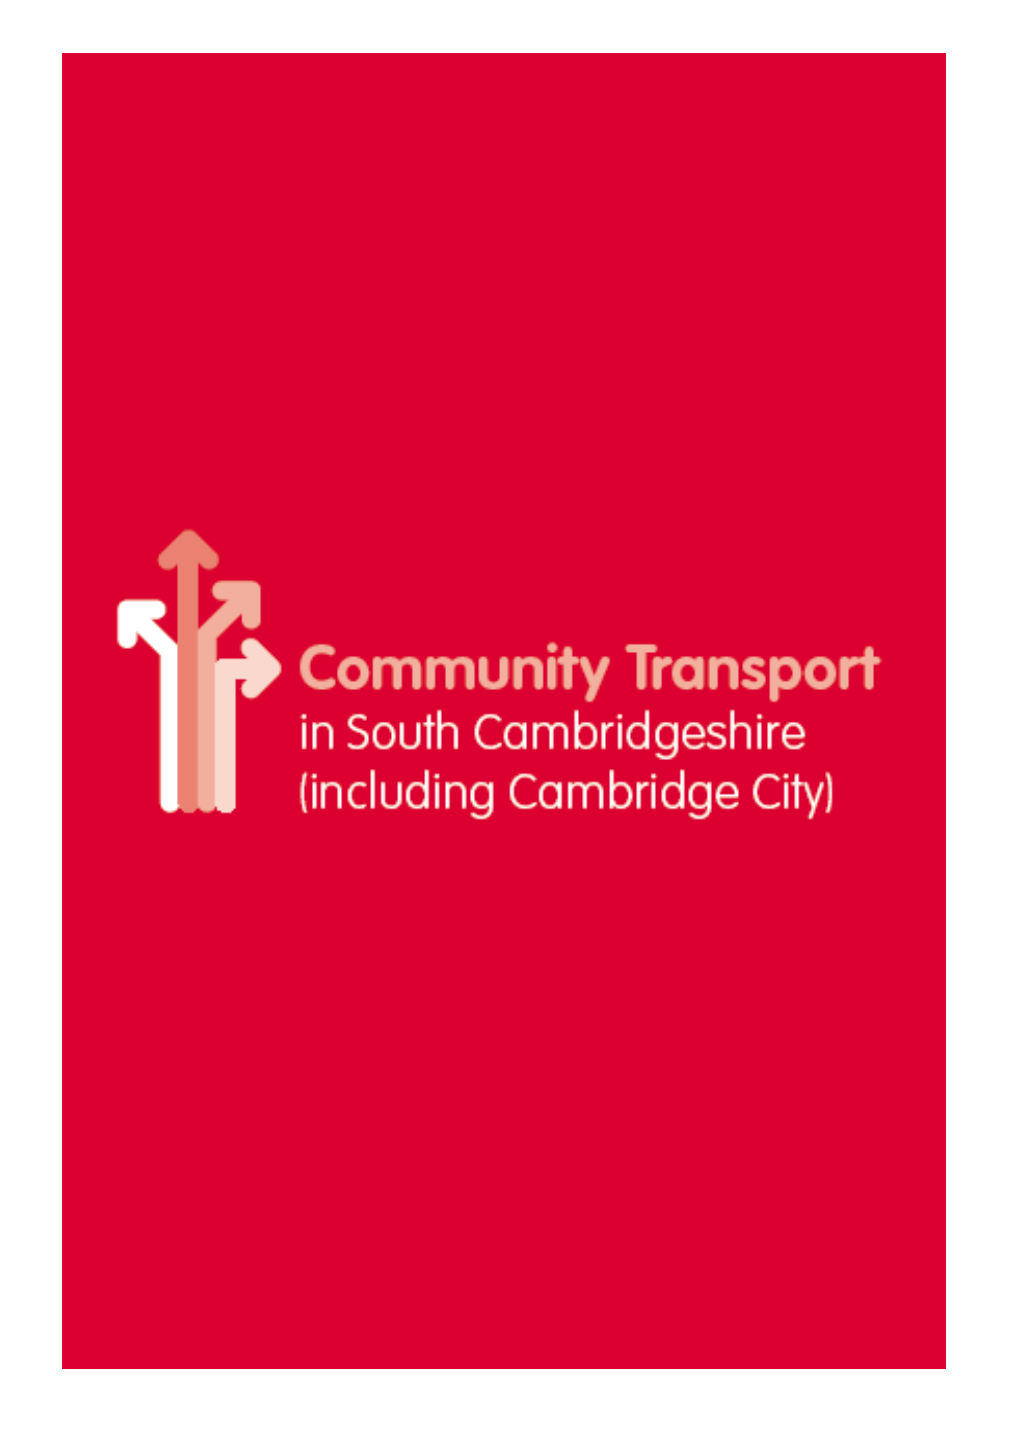 Produced by the Passenger Transport Group, Cambridgeshire County